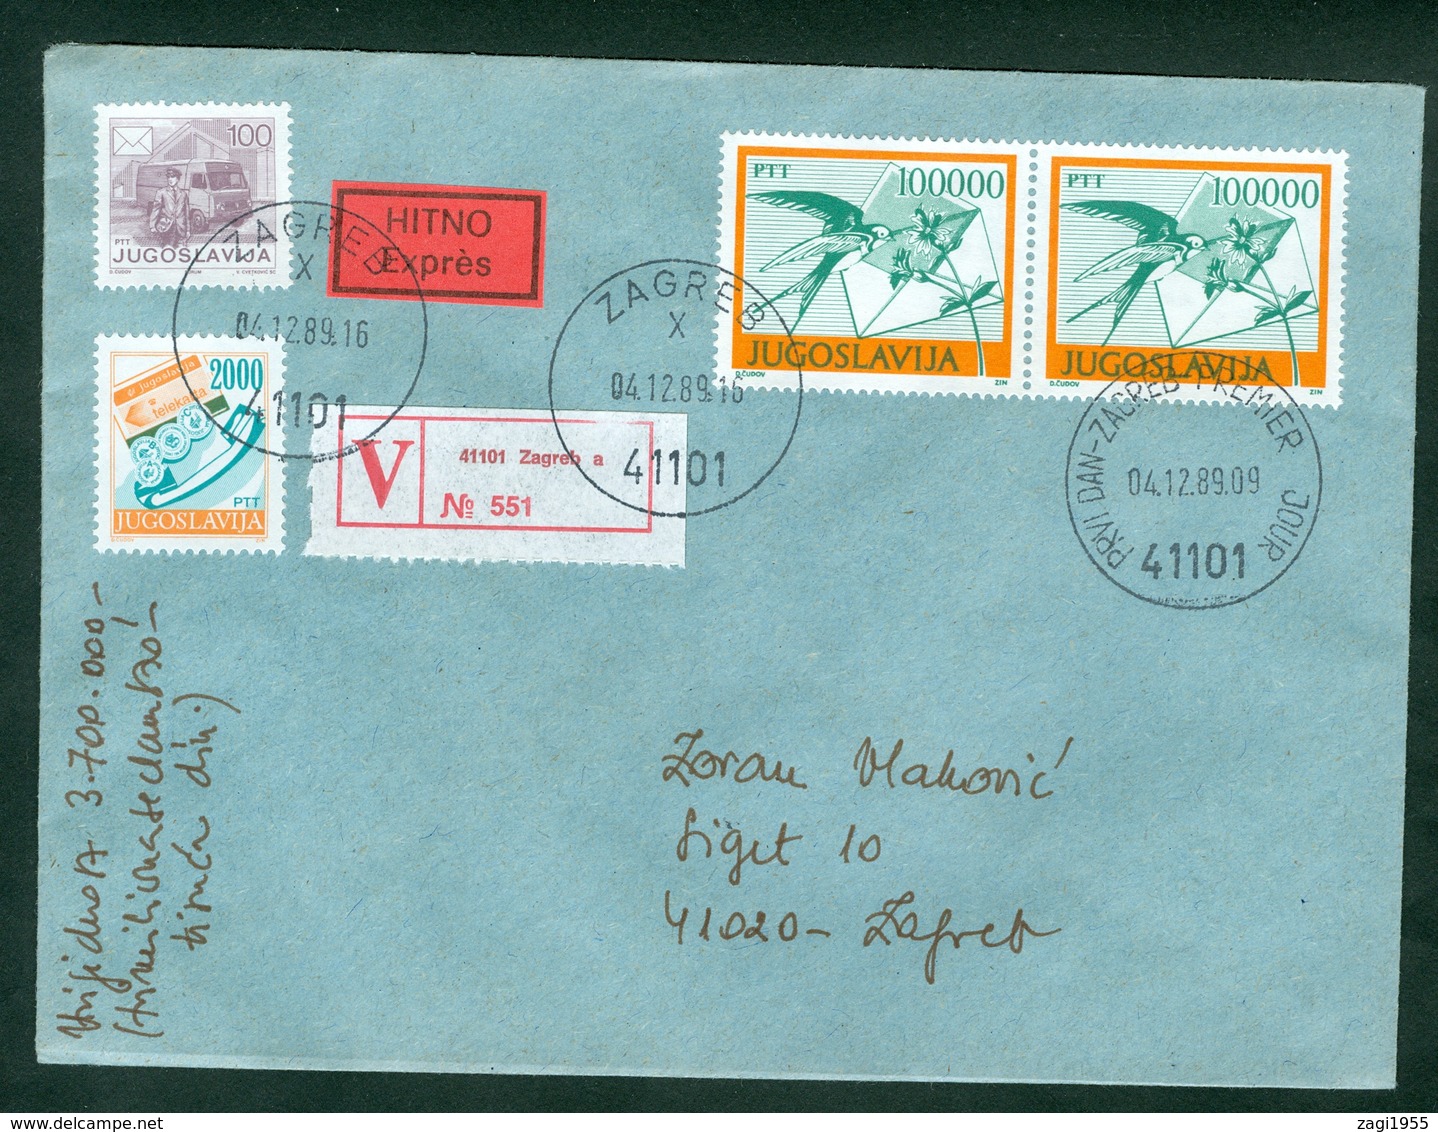 Yugoslavia 1989 FDC Definitive Issue Michel 2391 Swallow Valuable Letter Postal Traffic Inflation Postman - Briefe U. Dokumente